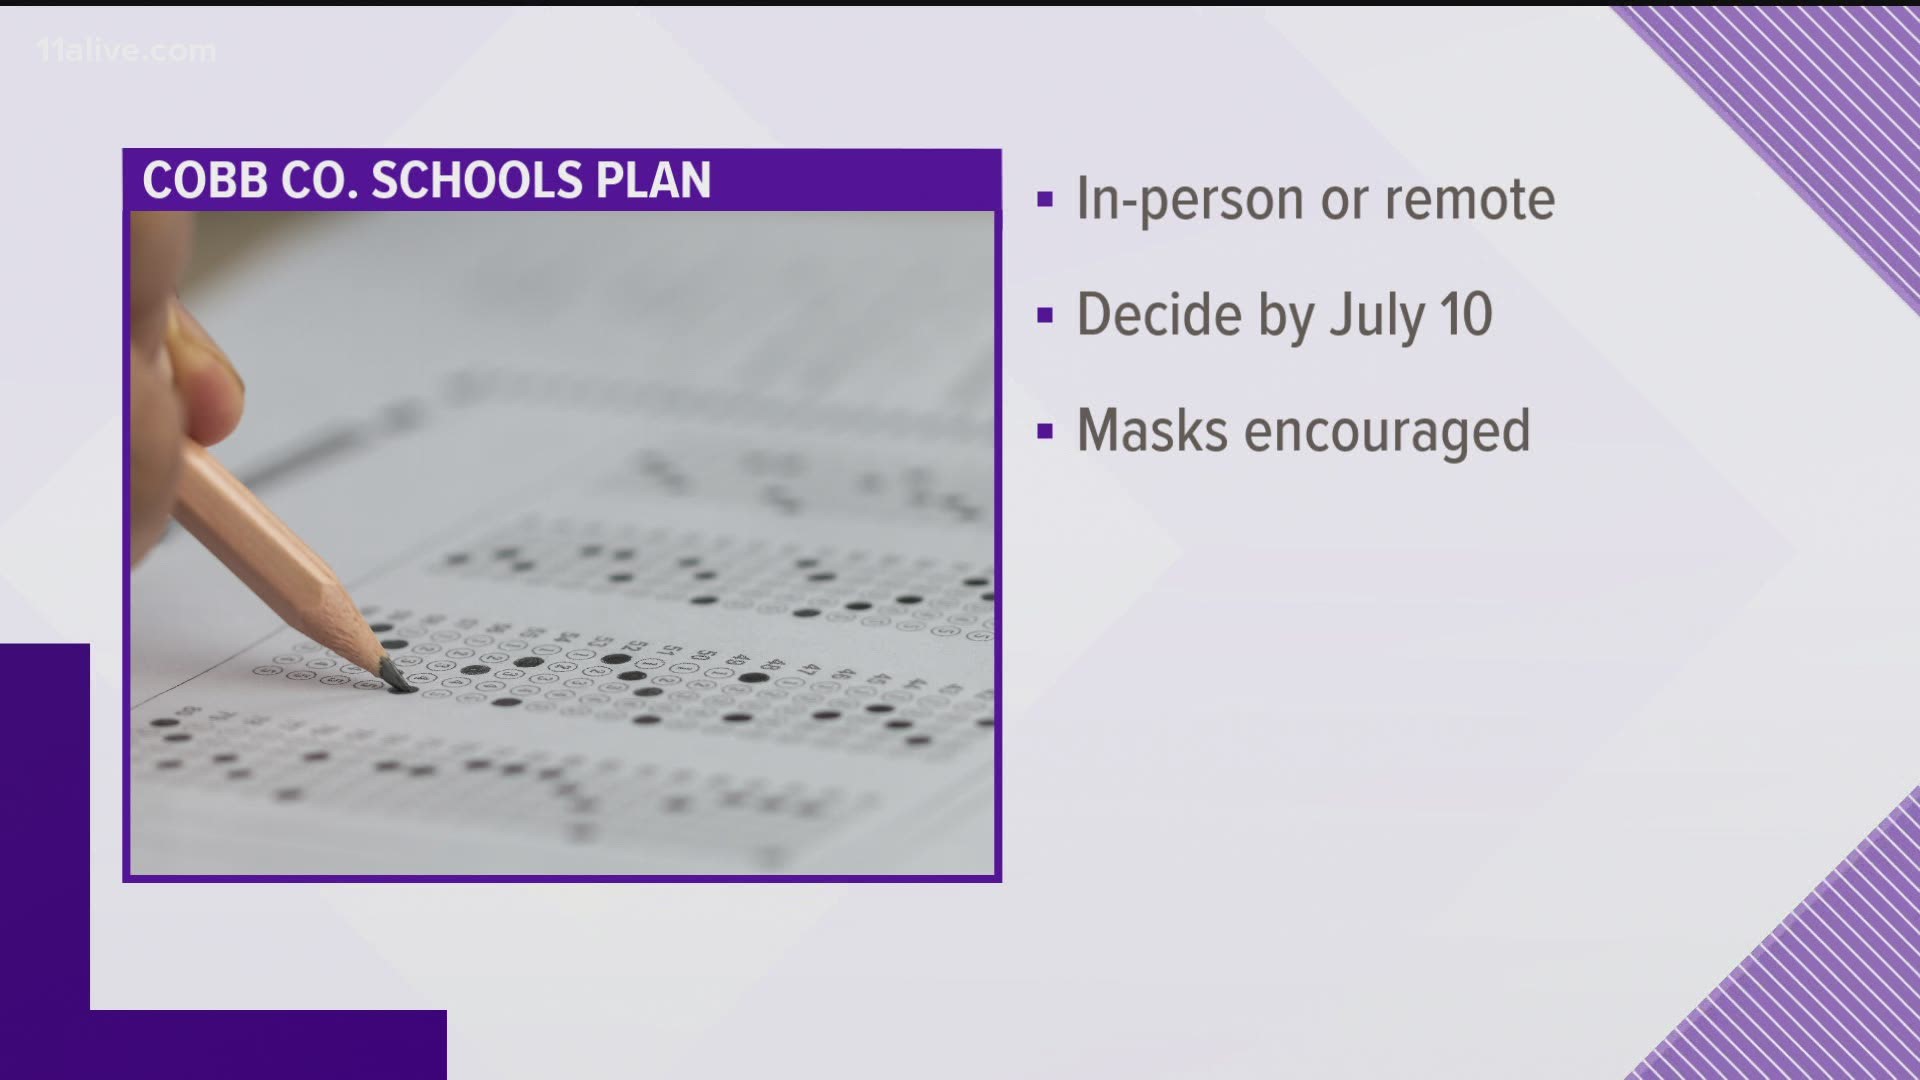 Some schools are still trying to develop their back-to-school plans - the big factor being what the pandemic will look like post-summer break.